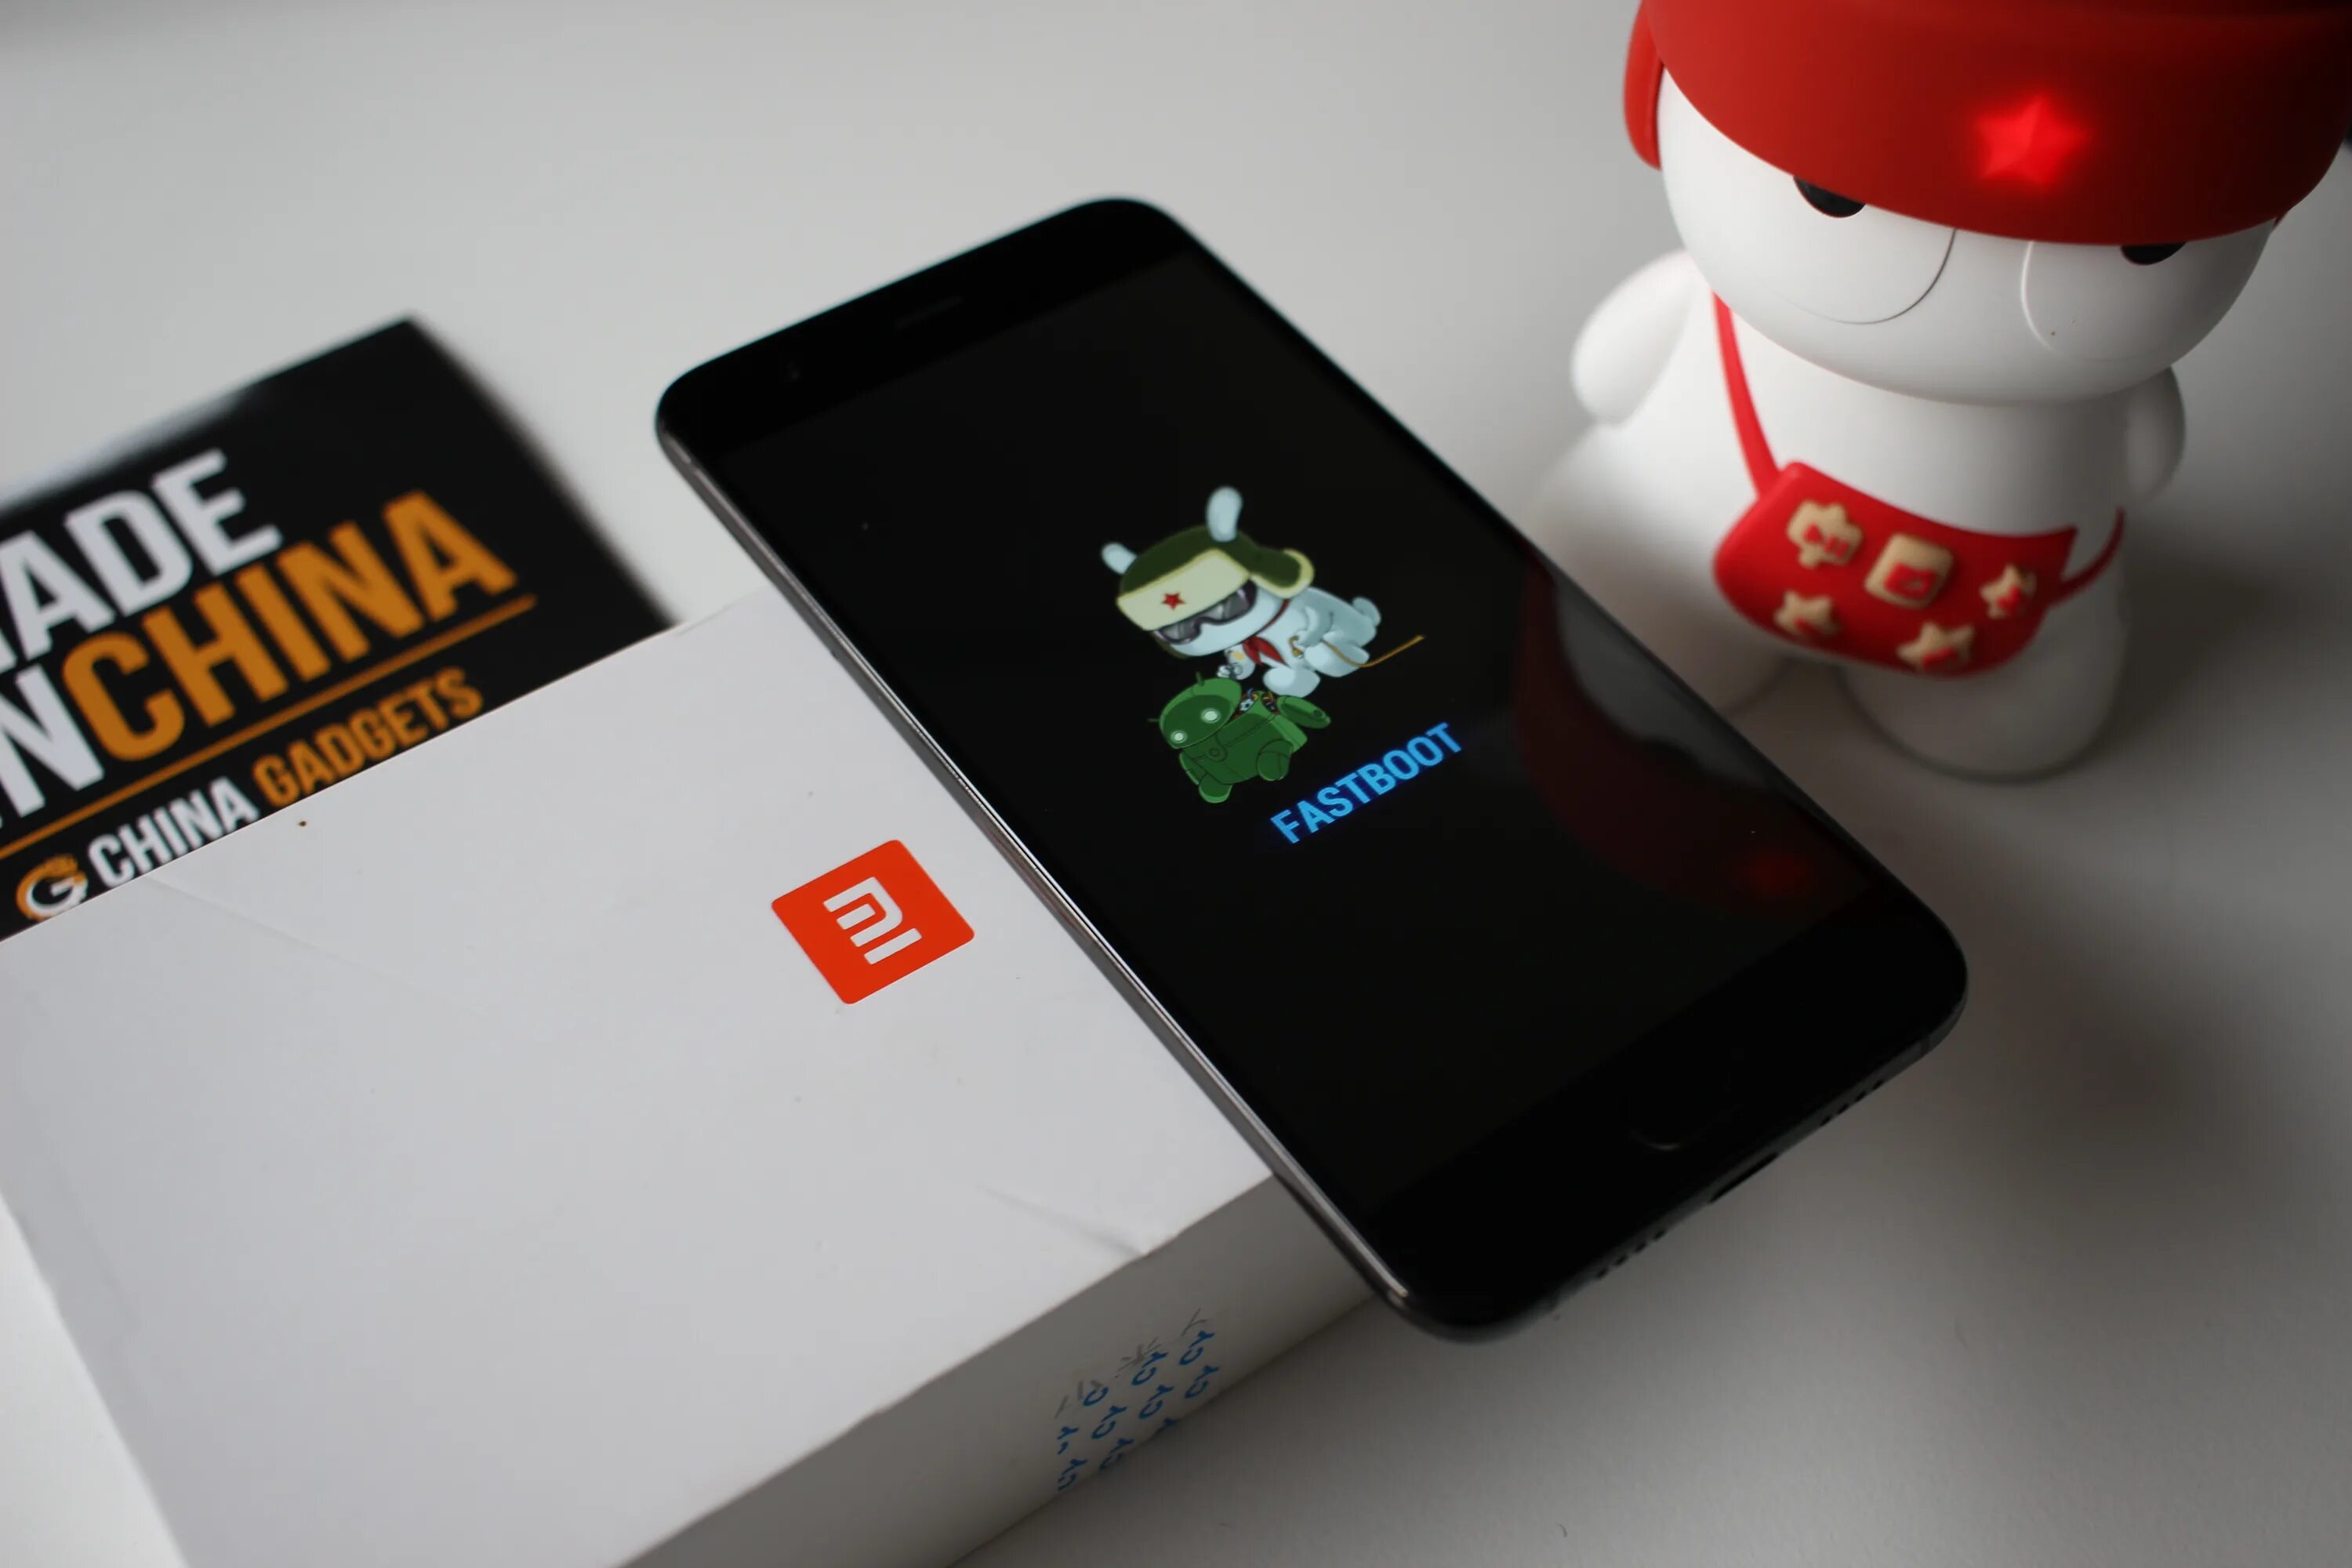 Xiaomi Redmi Note 8 Pro Fastboot. Fastboot Сяоми. Кролик Xiaomi Fastboot. Xiaomi Redmi Note 6 Fastboot. Fastboot redmi что делать